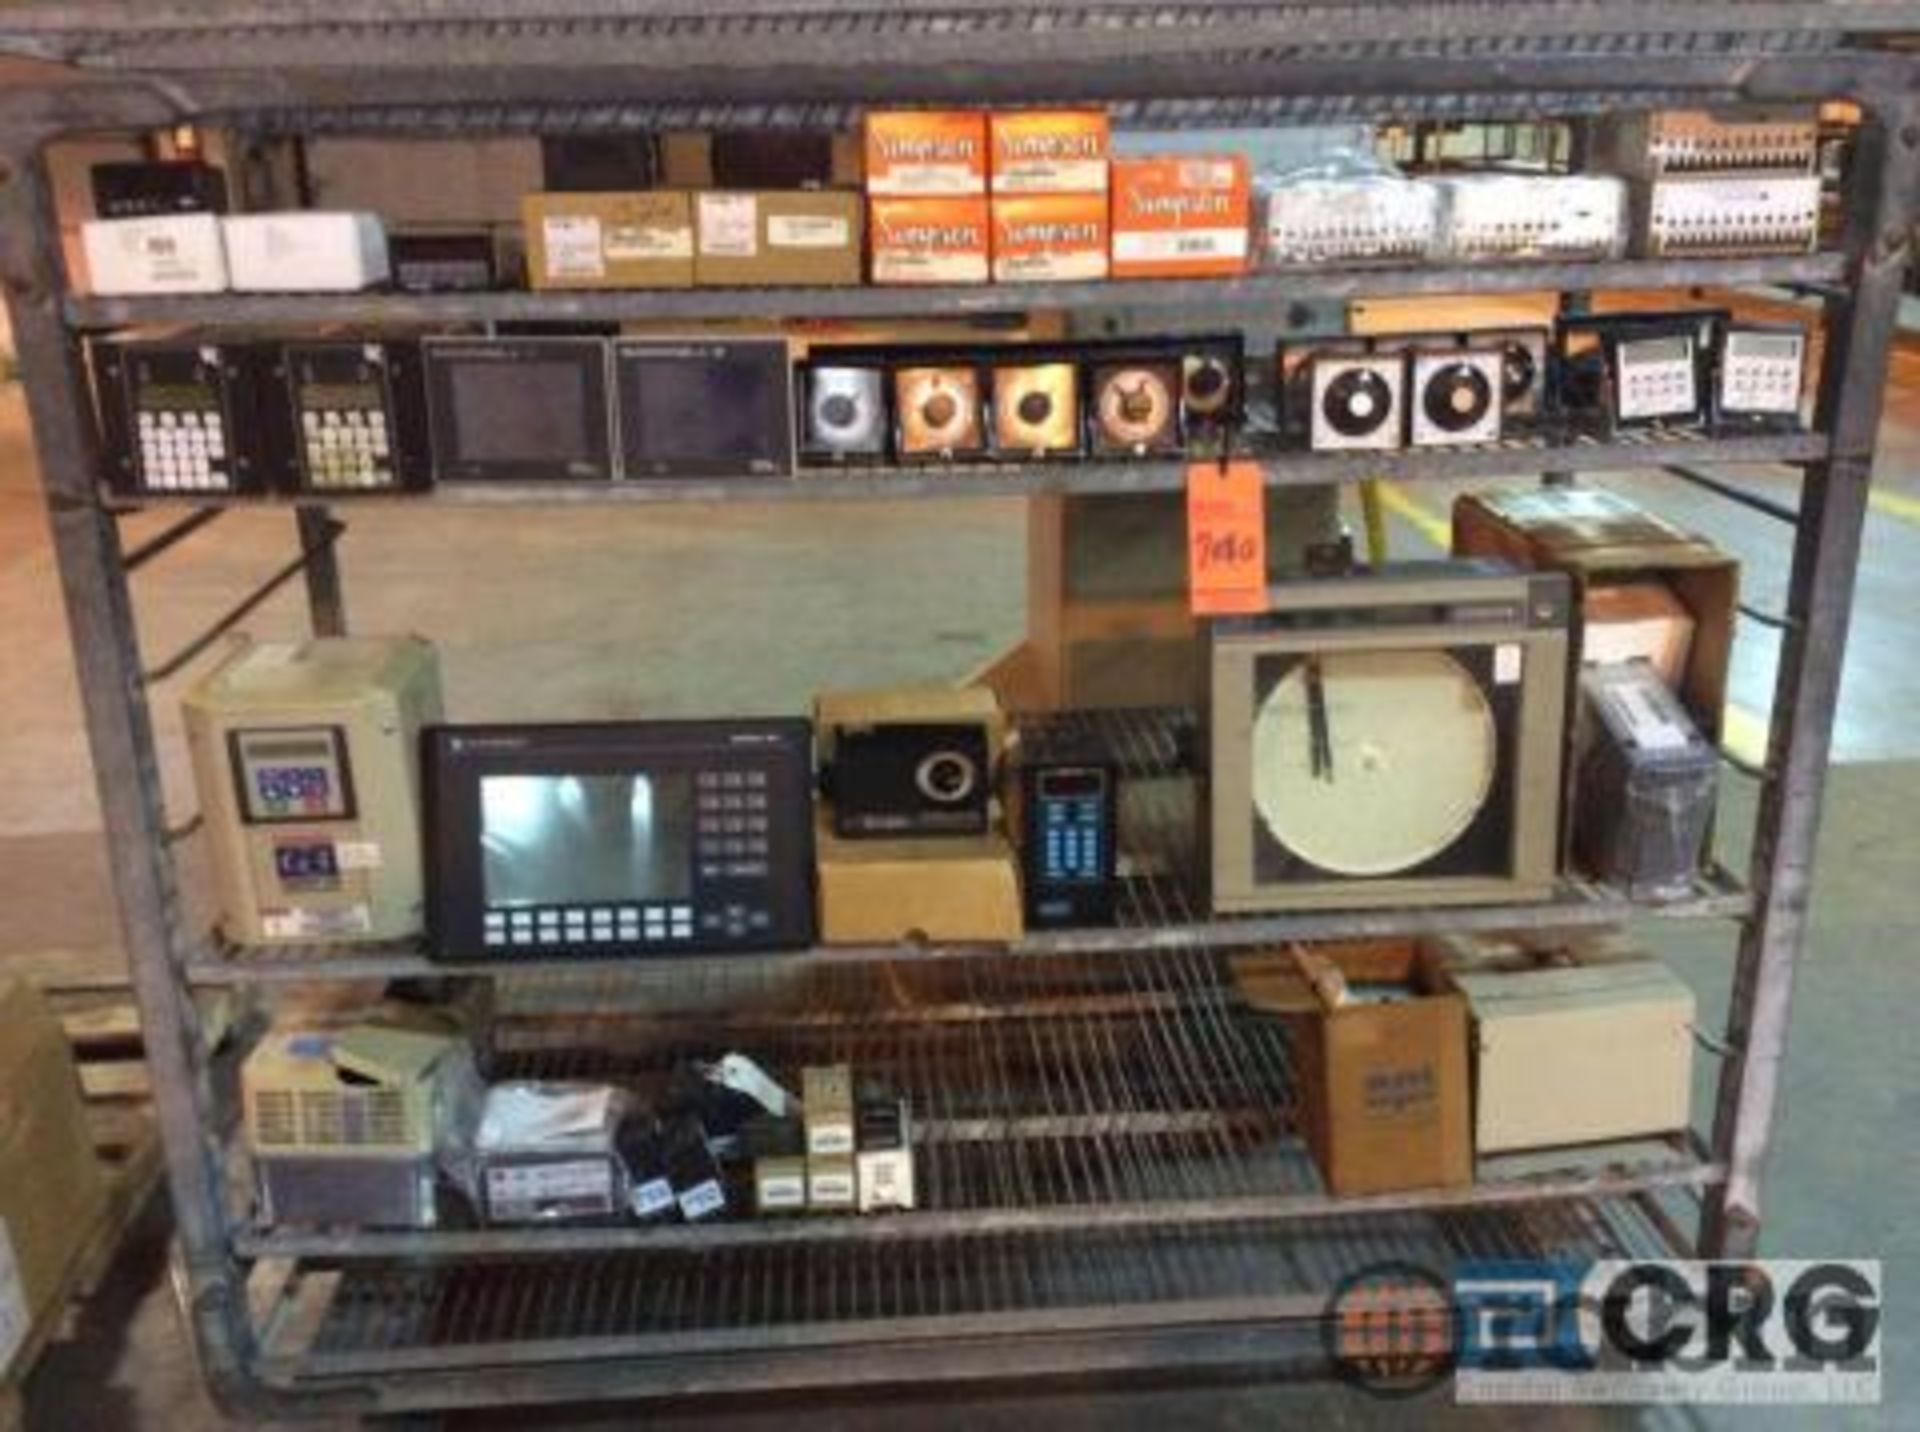 Lot of assorted electrical controls, drives, timers, and chart recorders [Peoria]